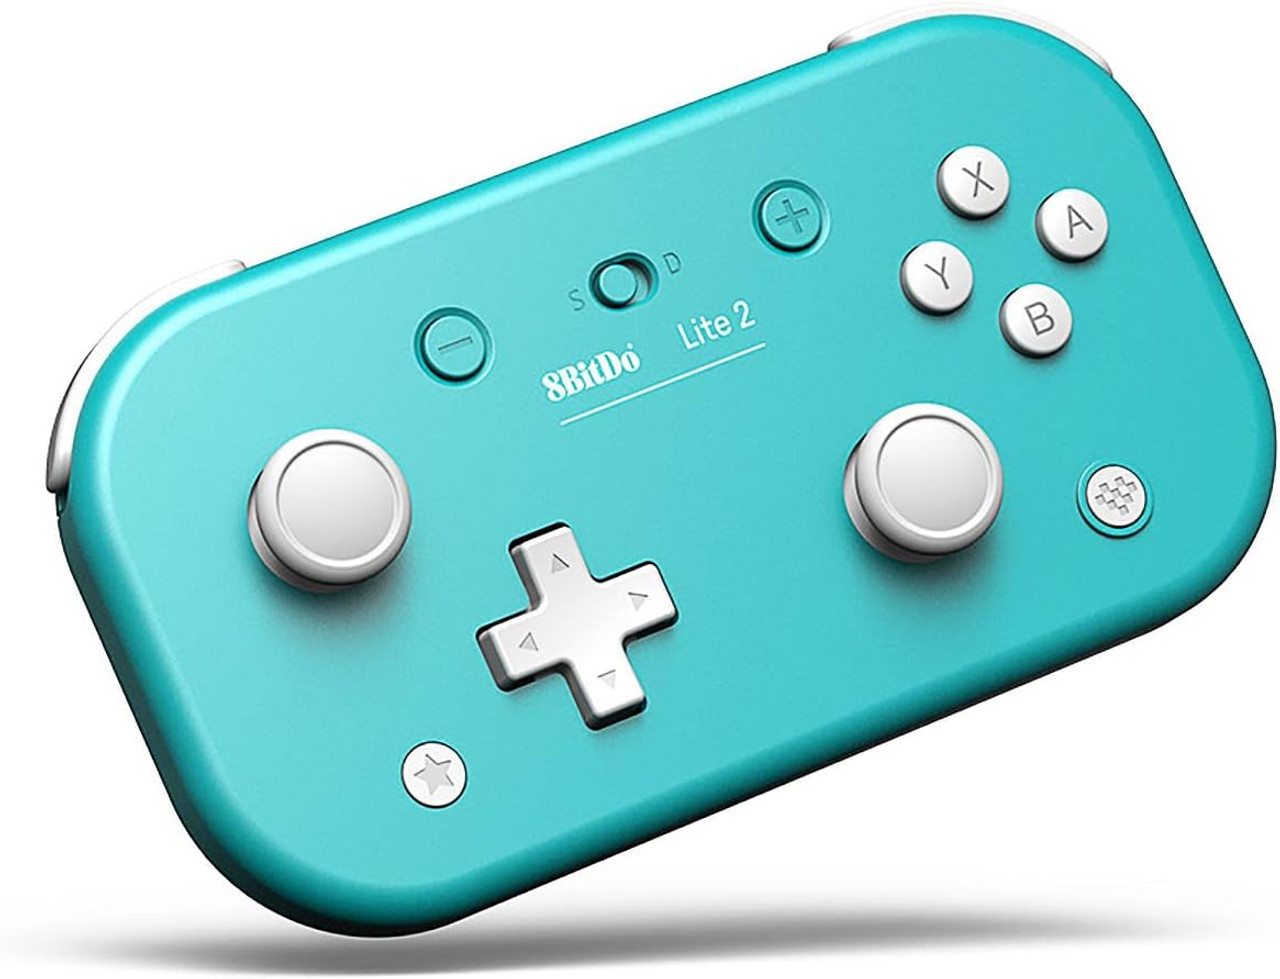 New Fangled Review of 8BitDo Lite Gamepad – The Grumpy Old Gamers